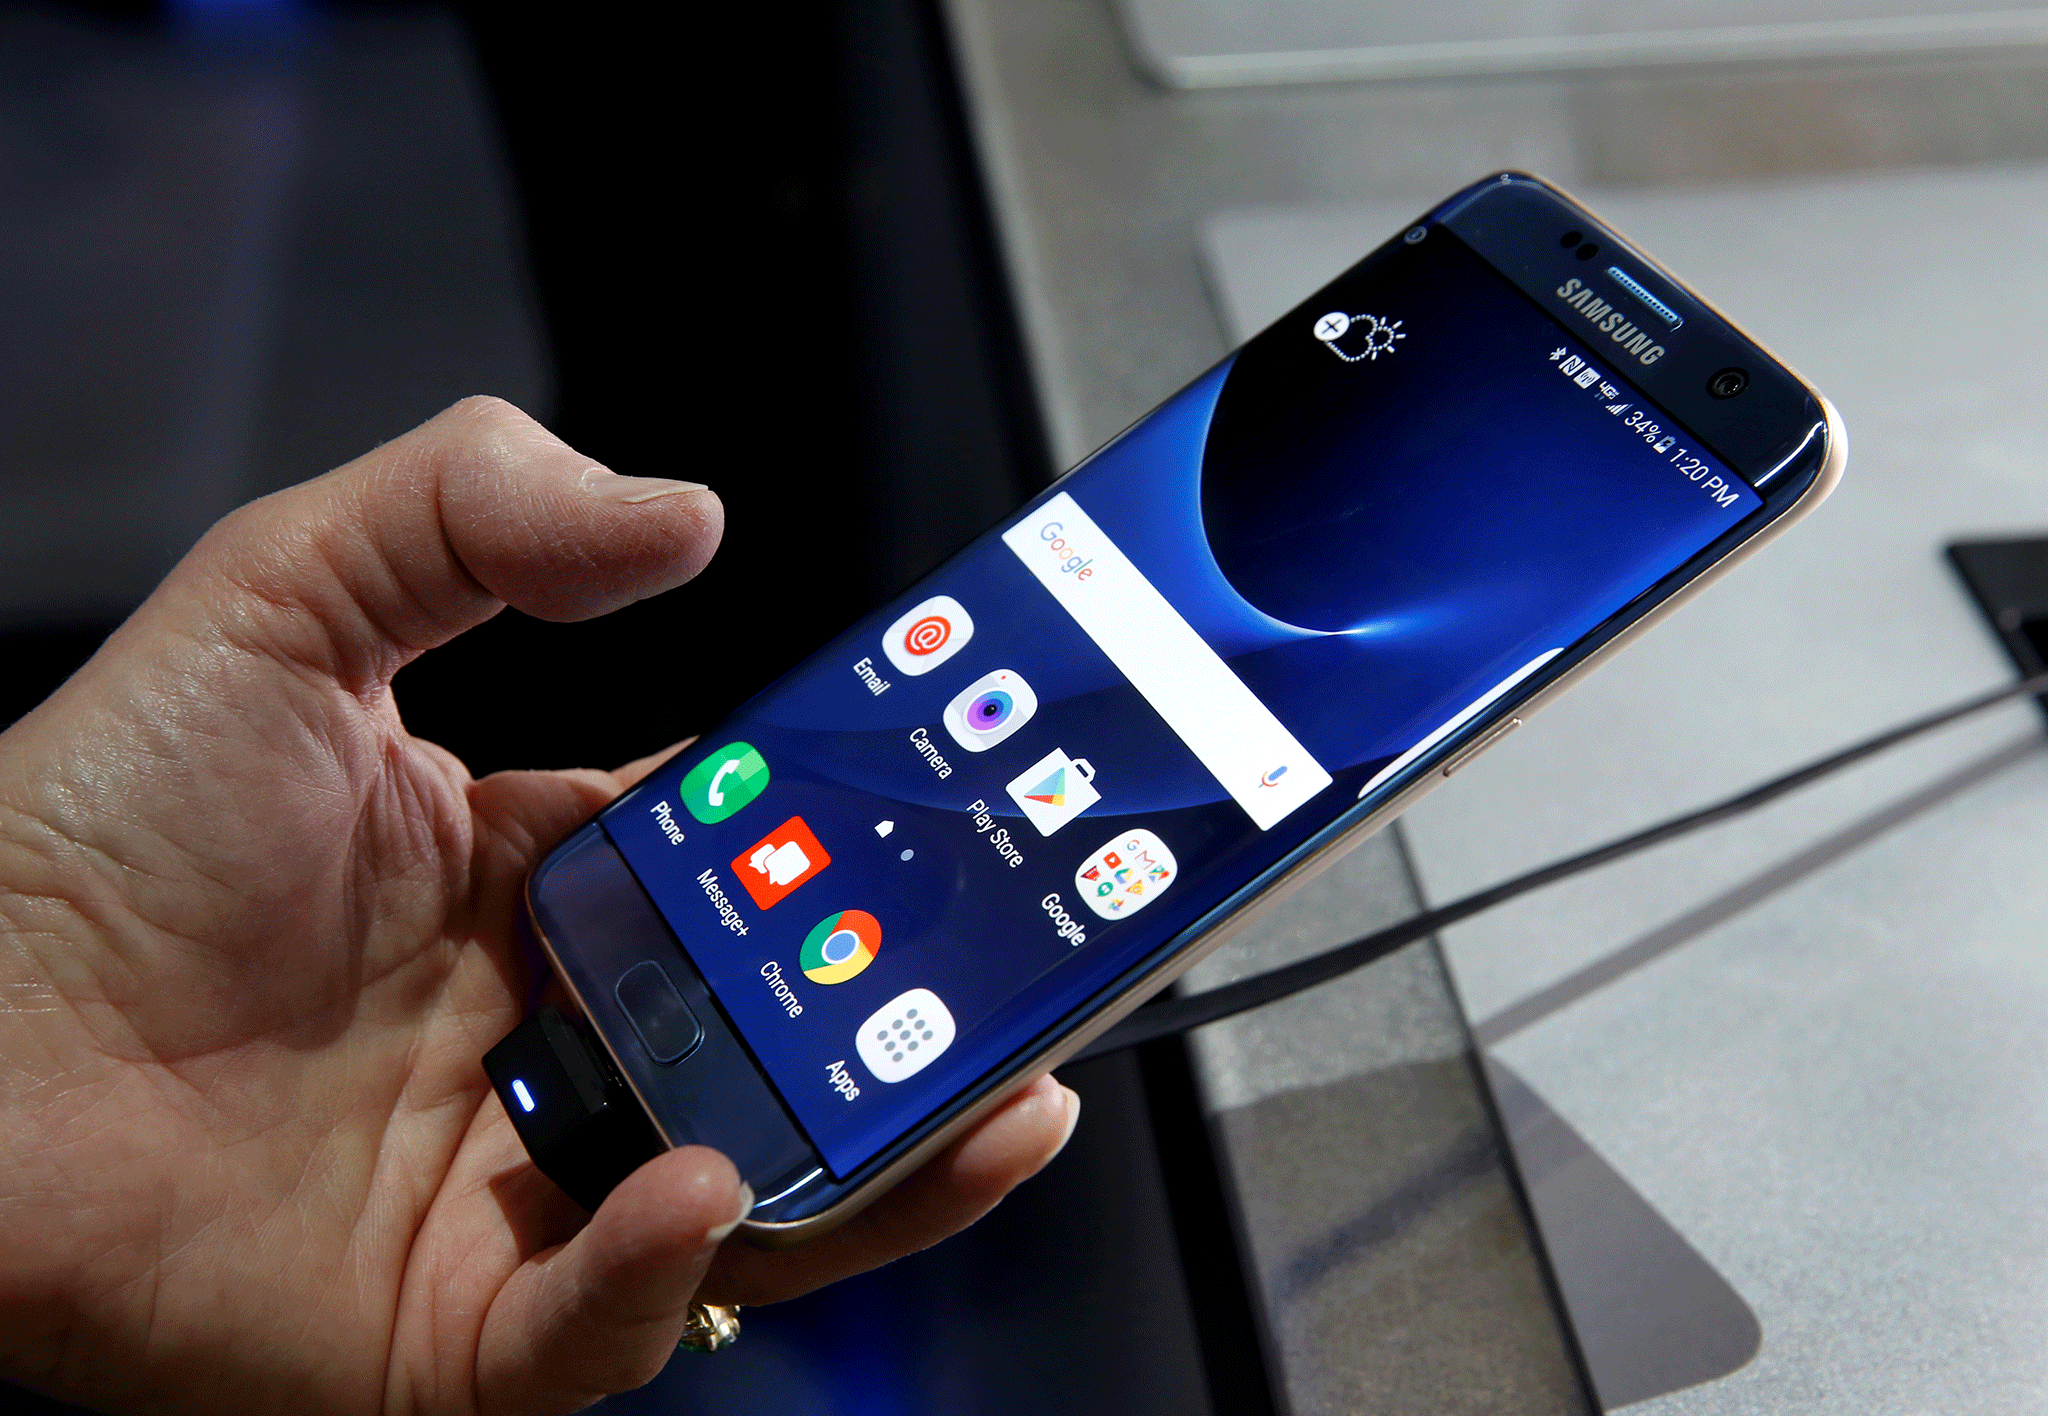 The world's biggest smartphone maker says it has enough cash to deal with the Note 7 problems